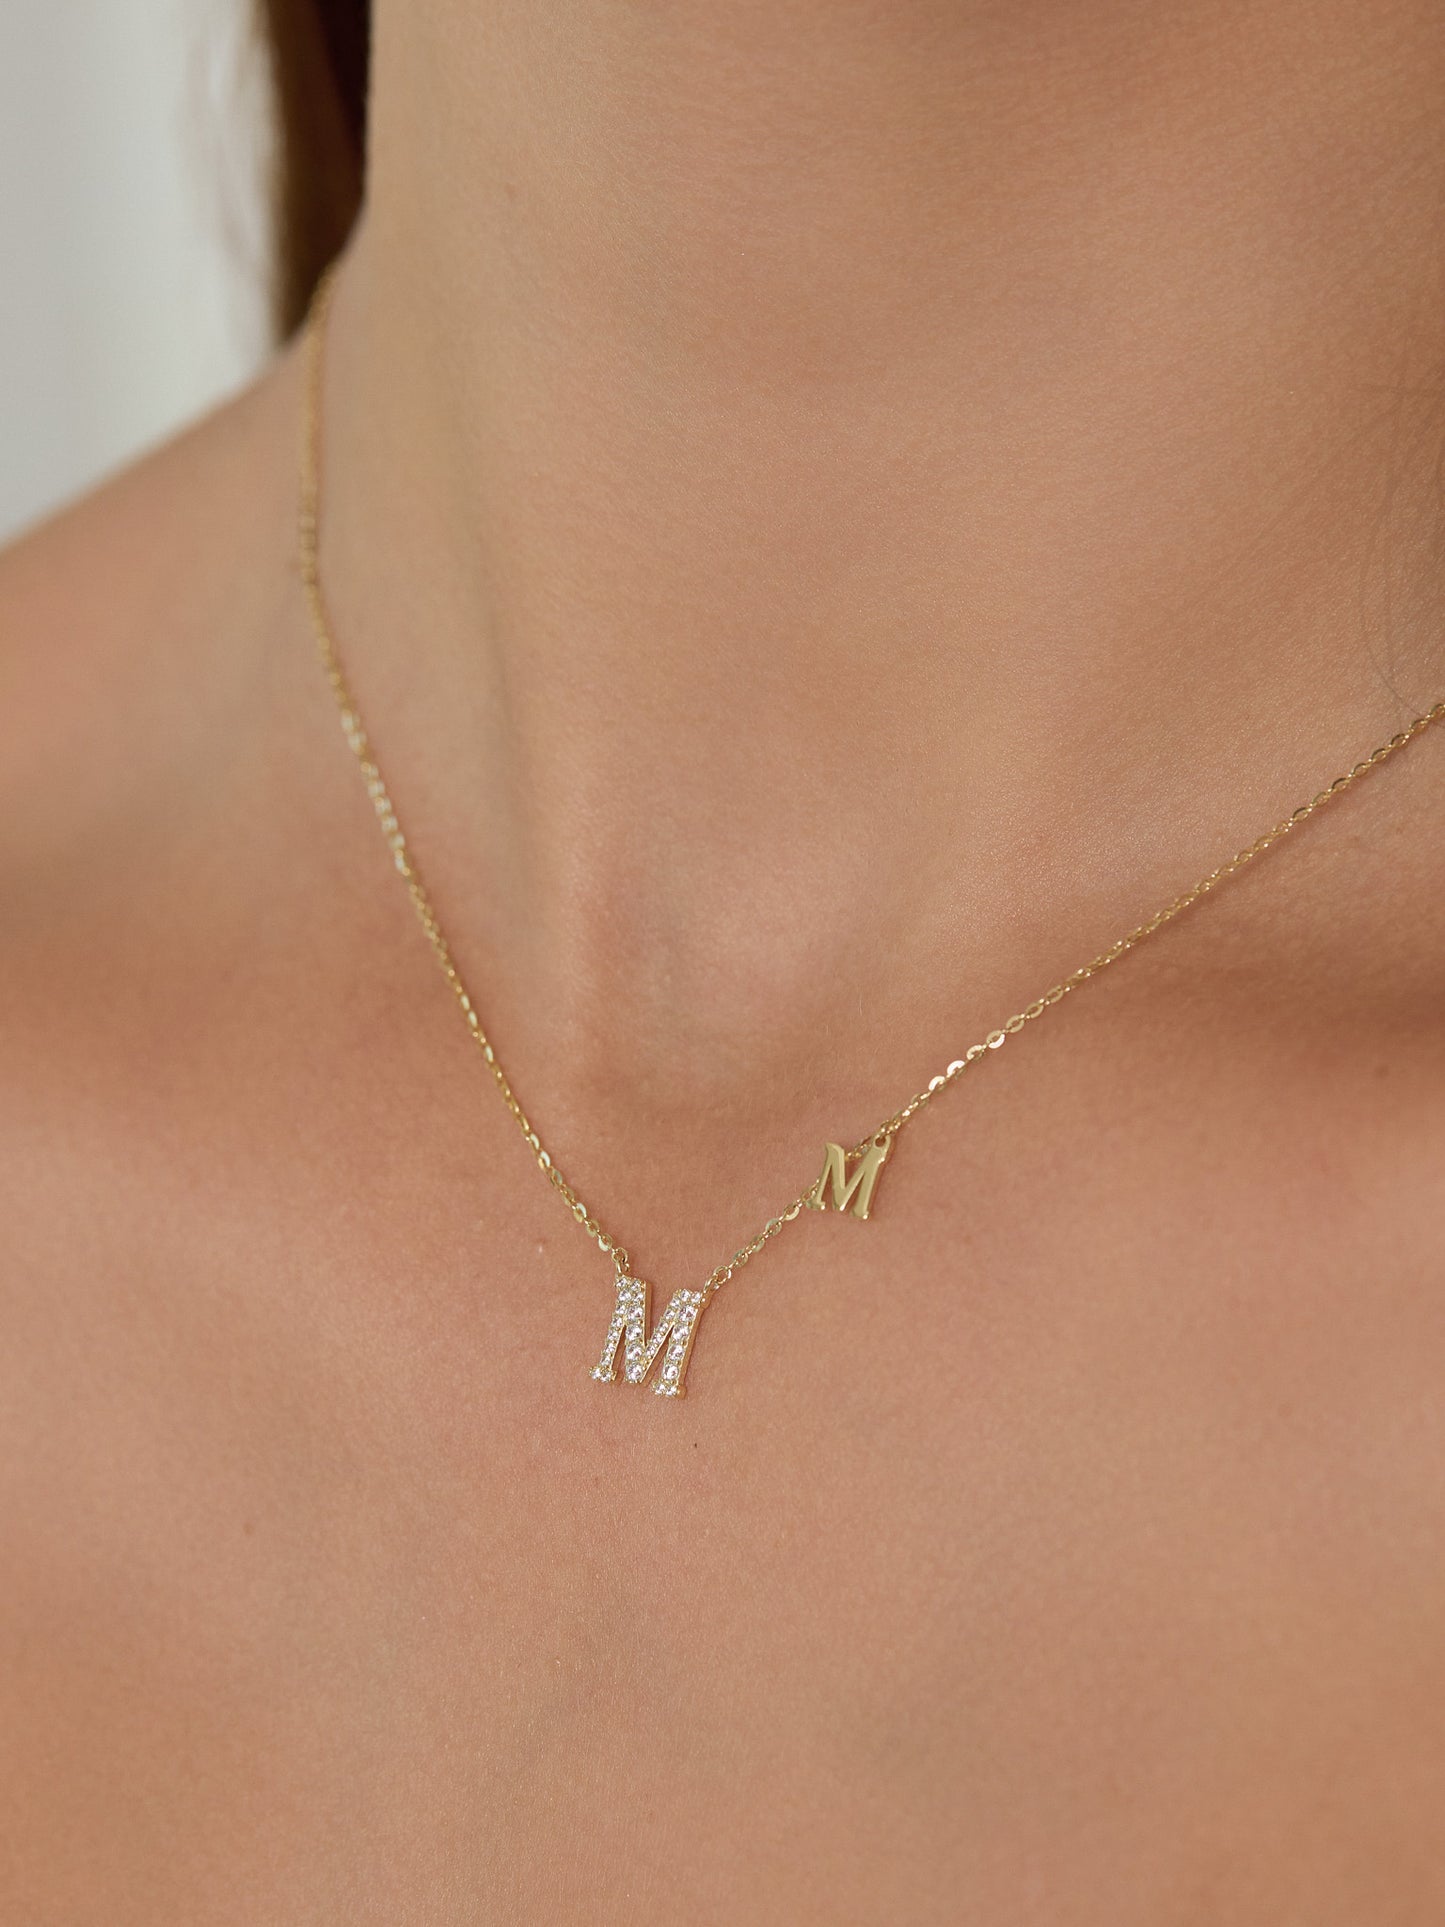 With the Letter "M" Necklace